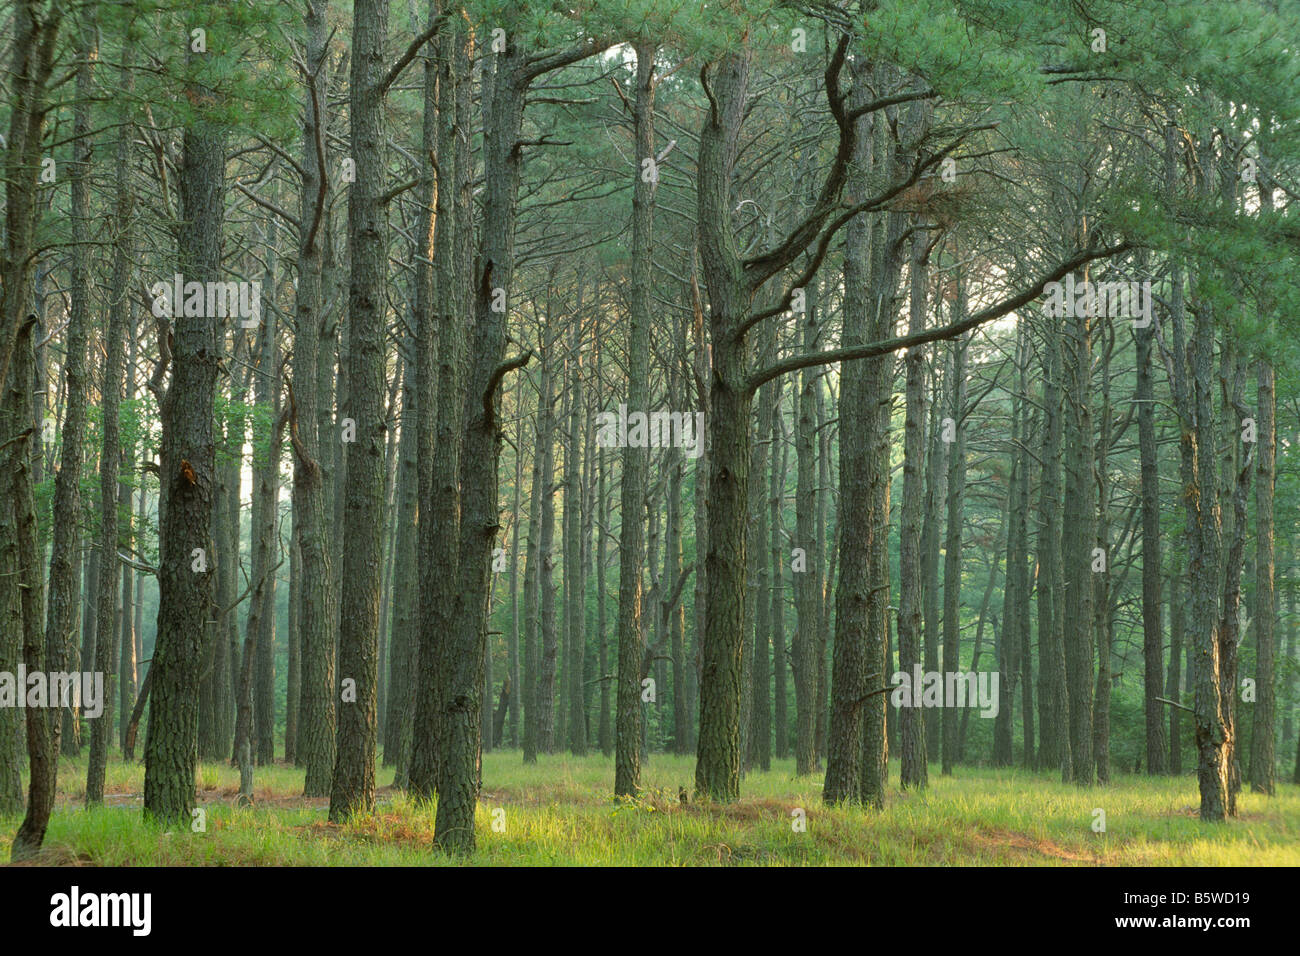 Loblolly pine forest Stock Photo